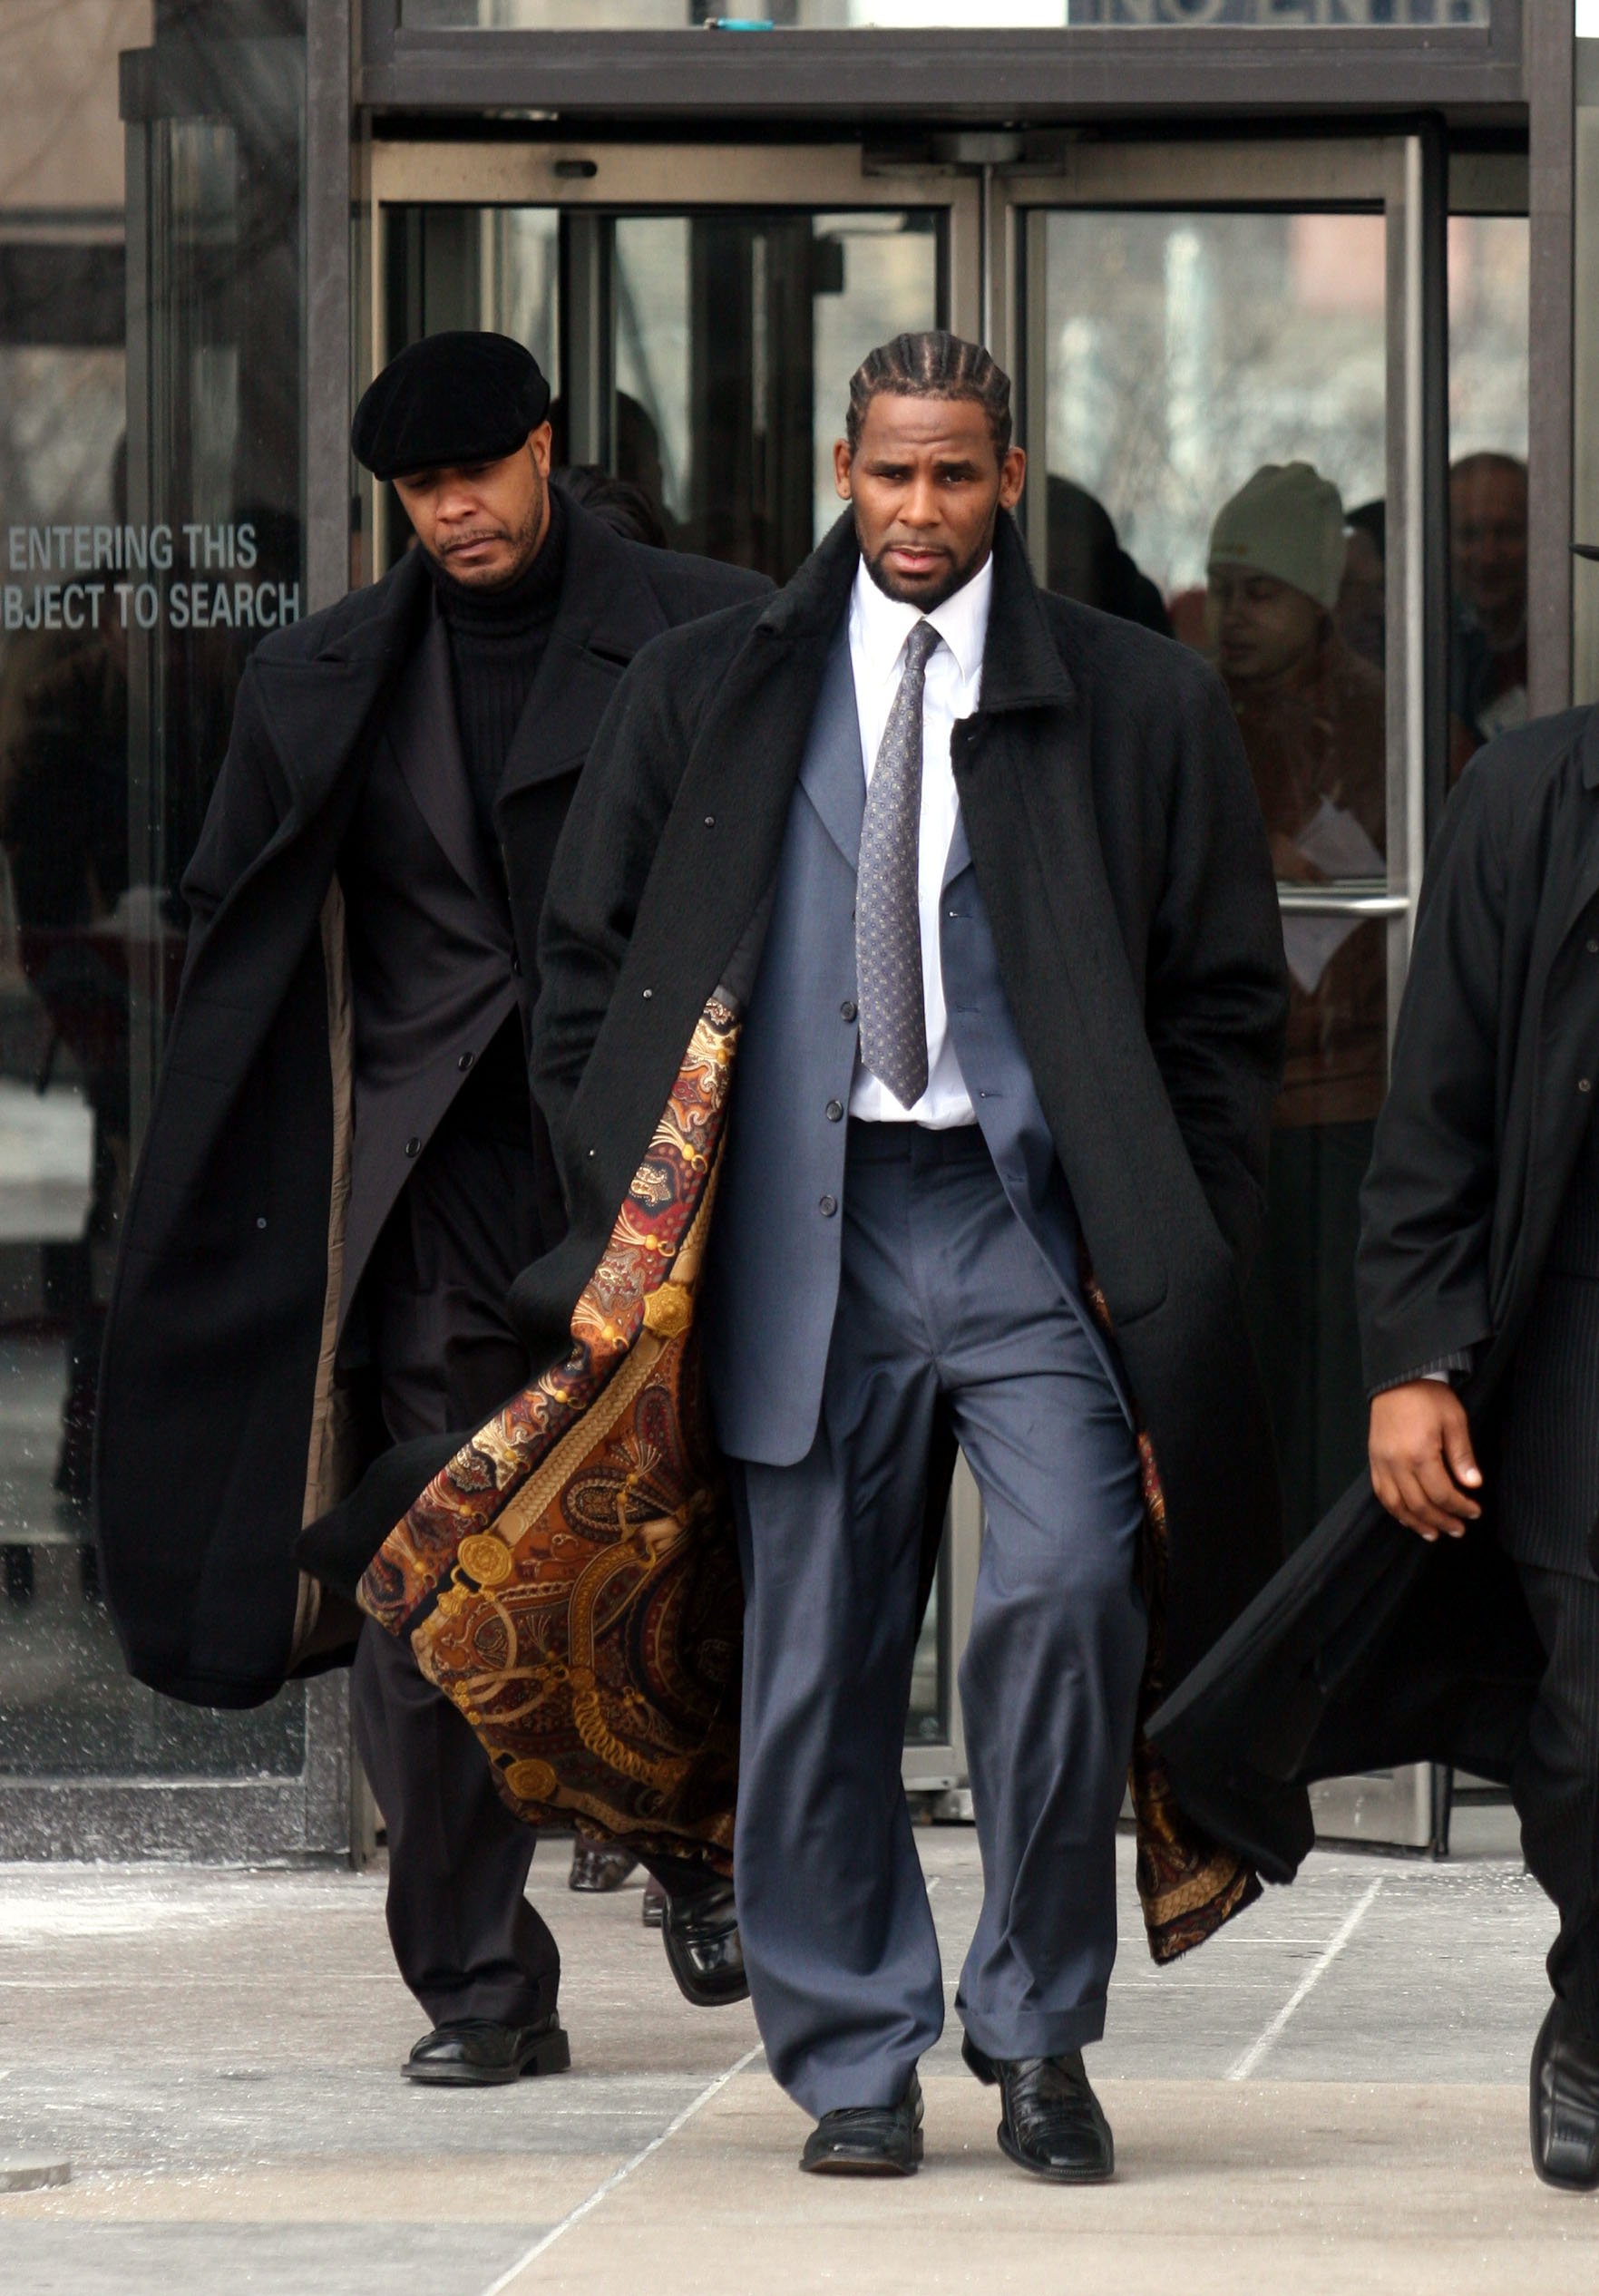 R. Kelly leaving Cook County Jail after his charges in 2007 | Source: Getty Images/GlobalImagesUkraine